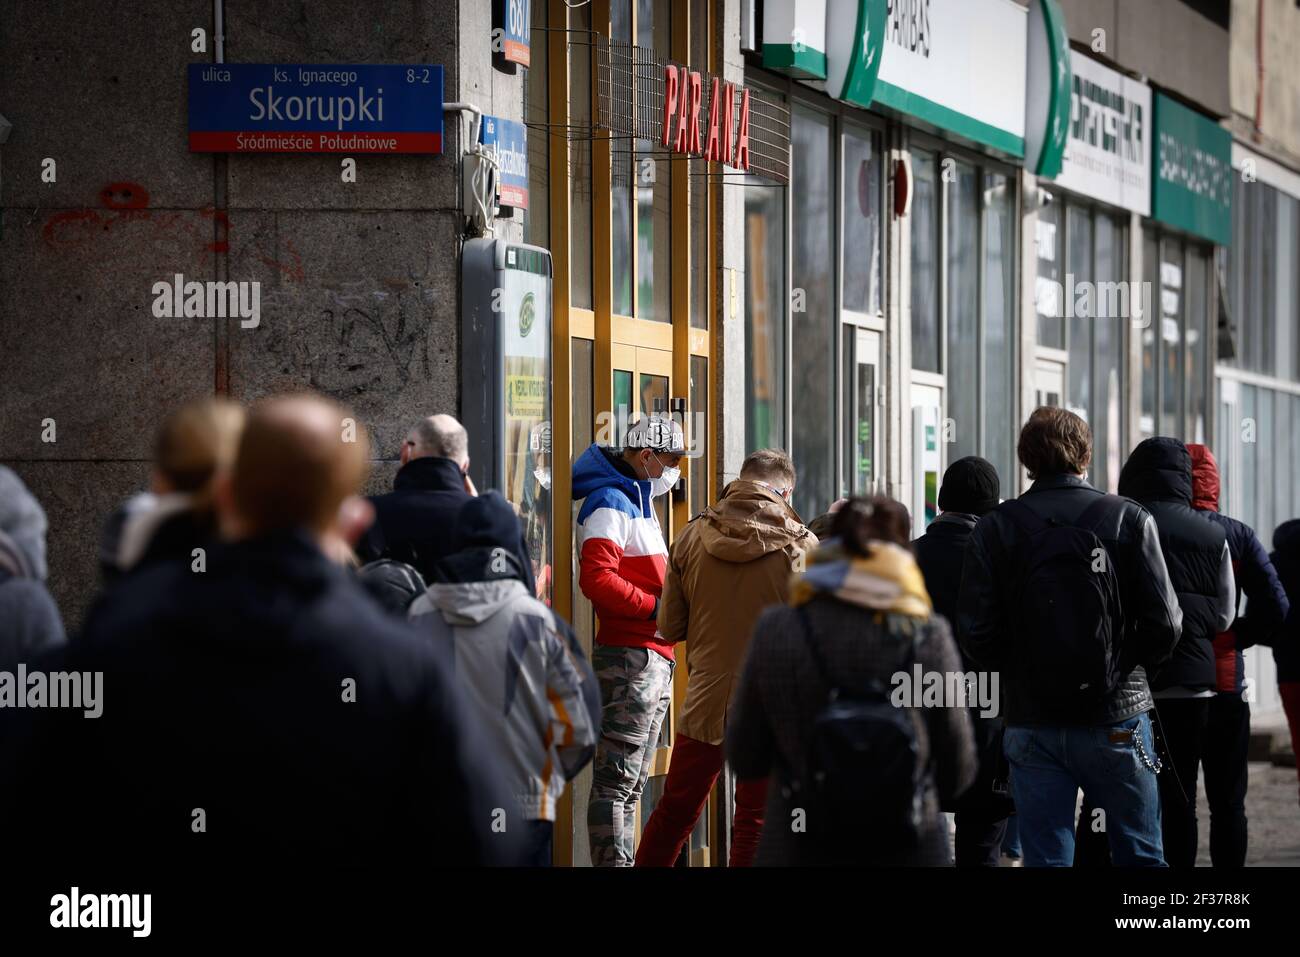 Warsaw, Poland. 15th Mar, 2021. People line up outside a COVID-19 testing clinic in central Warsaw, Poland, on March 15, 2021. The Polish government reintroduced lockdown measures in Warsaw on Monday. According to Polish Health Minister Adam Niedzielski, the lockdown is in force from March 15 to March 28. Hotels, cultural institutions and sports facilities are shut down and the operation of shopping centers is also be restricted. Credit: Jaap Arriens/Xinhua/Alamy Live News Stock Photo